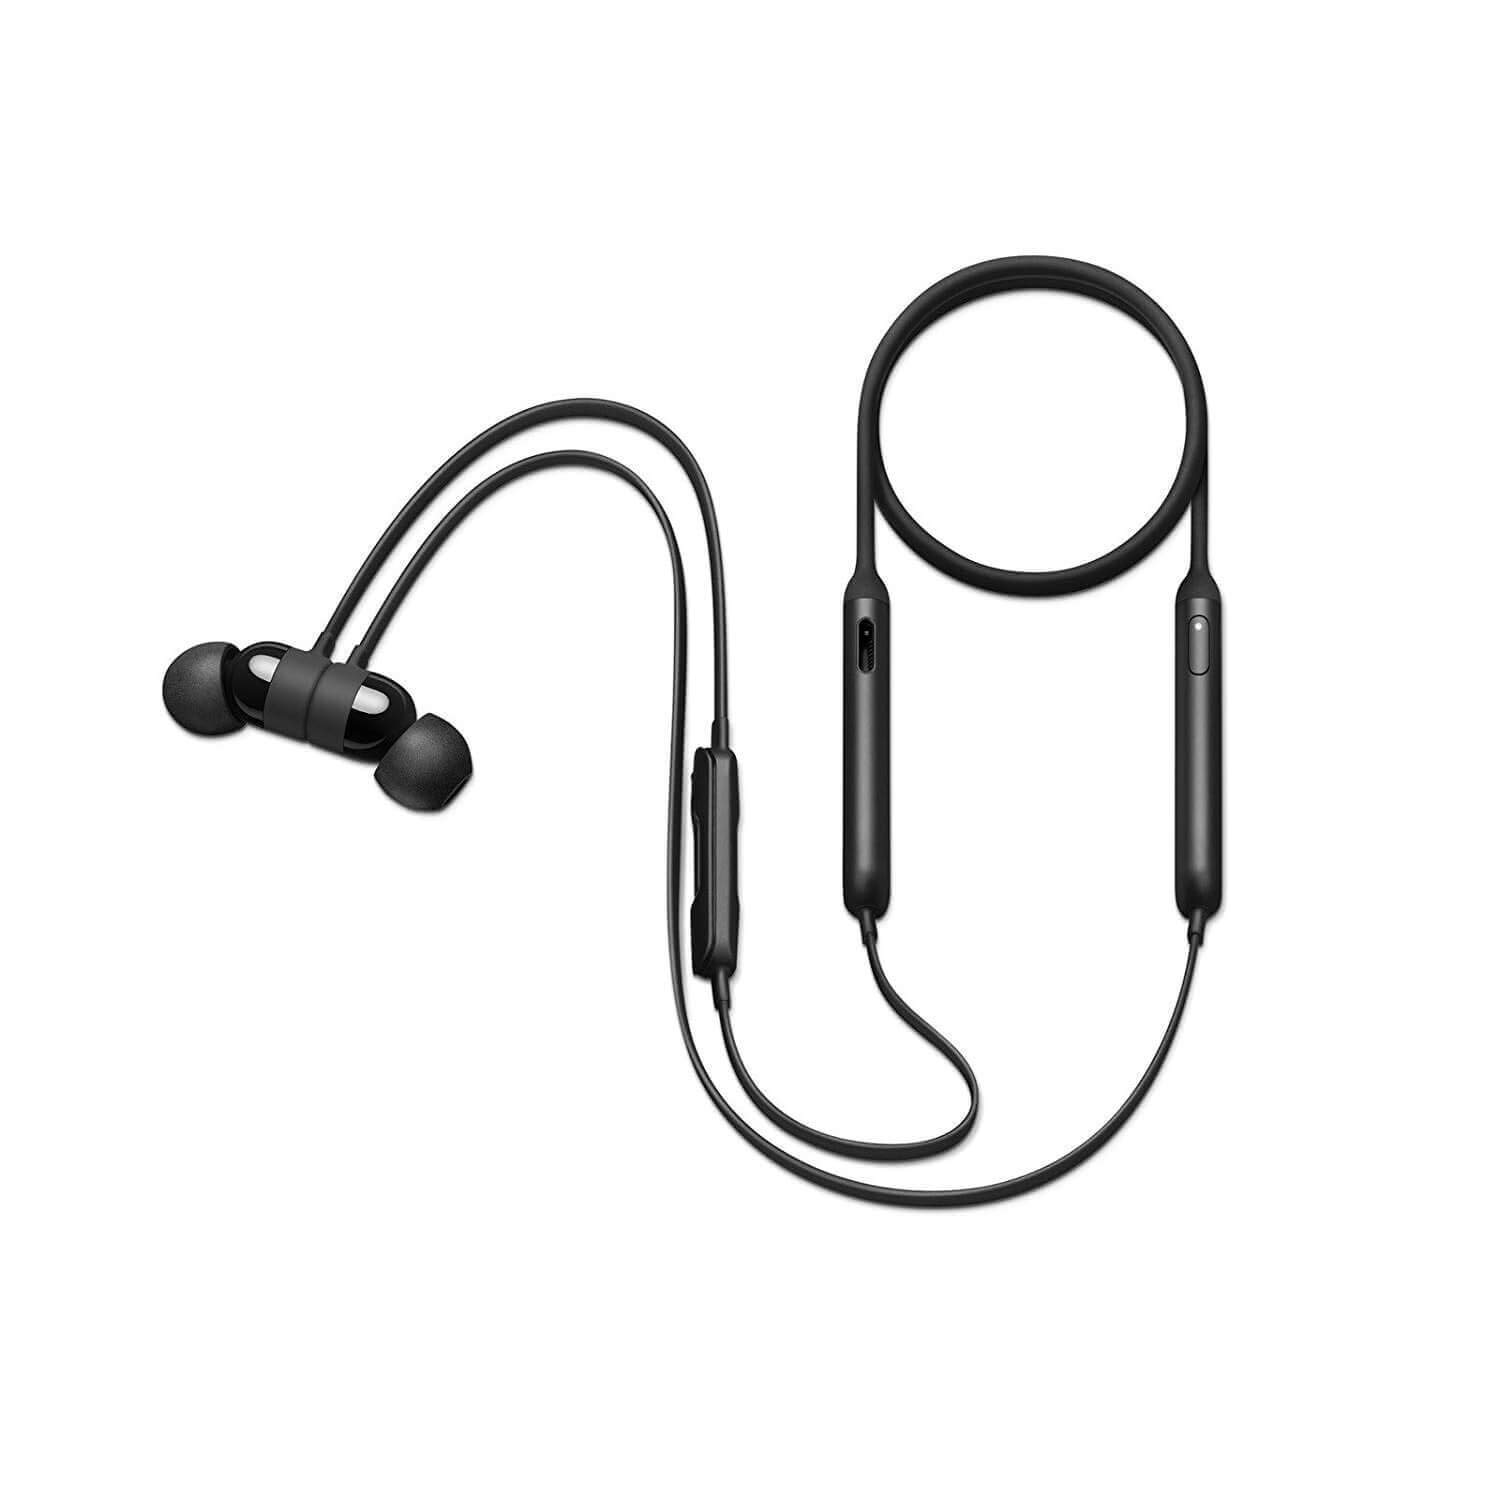 Beats X Wireless In-Ear Headphones Up to 8 Hours of Battery Life - Black